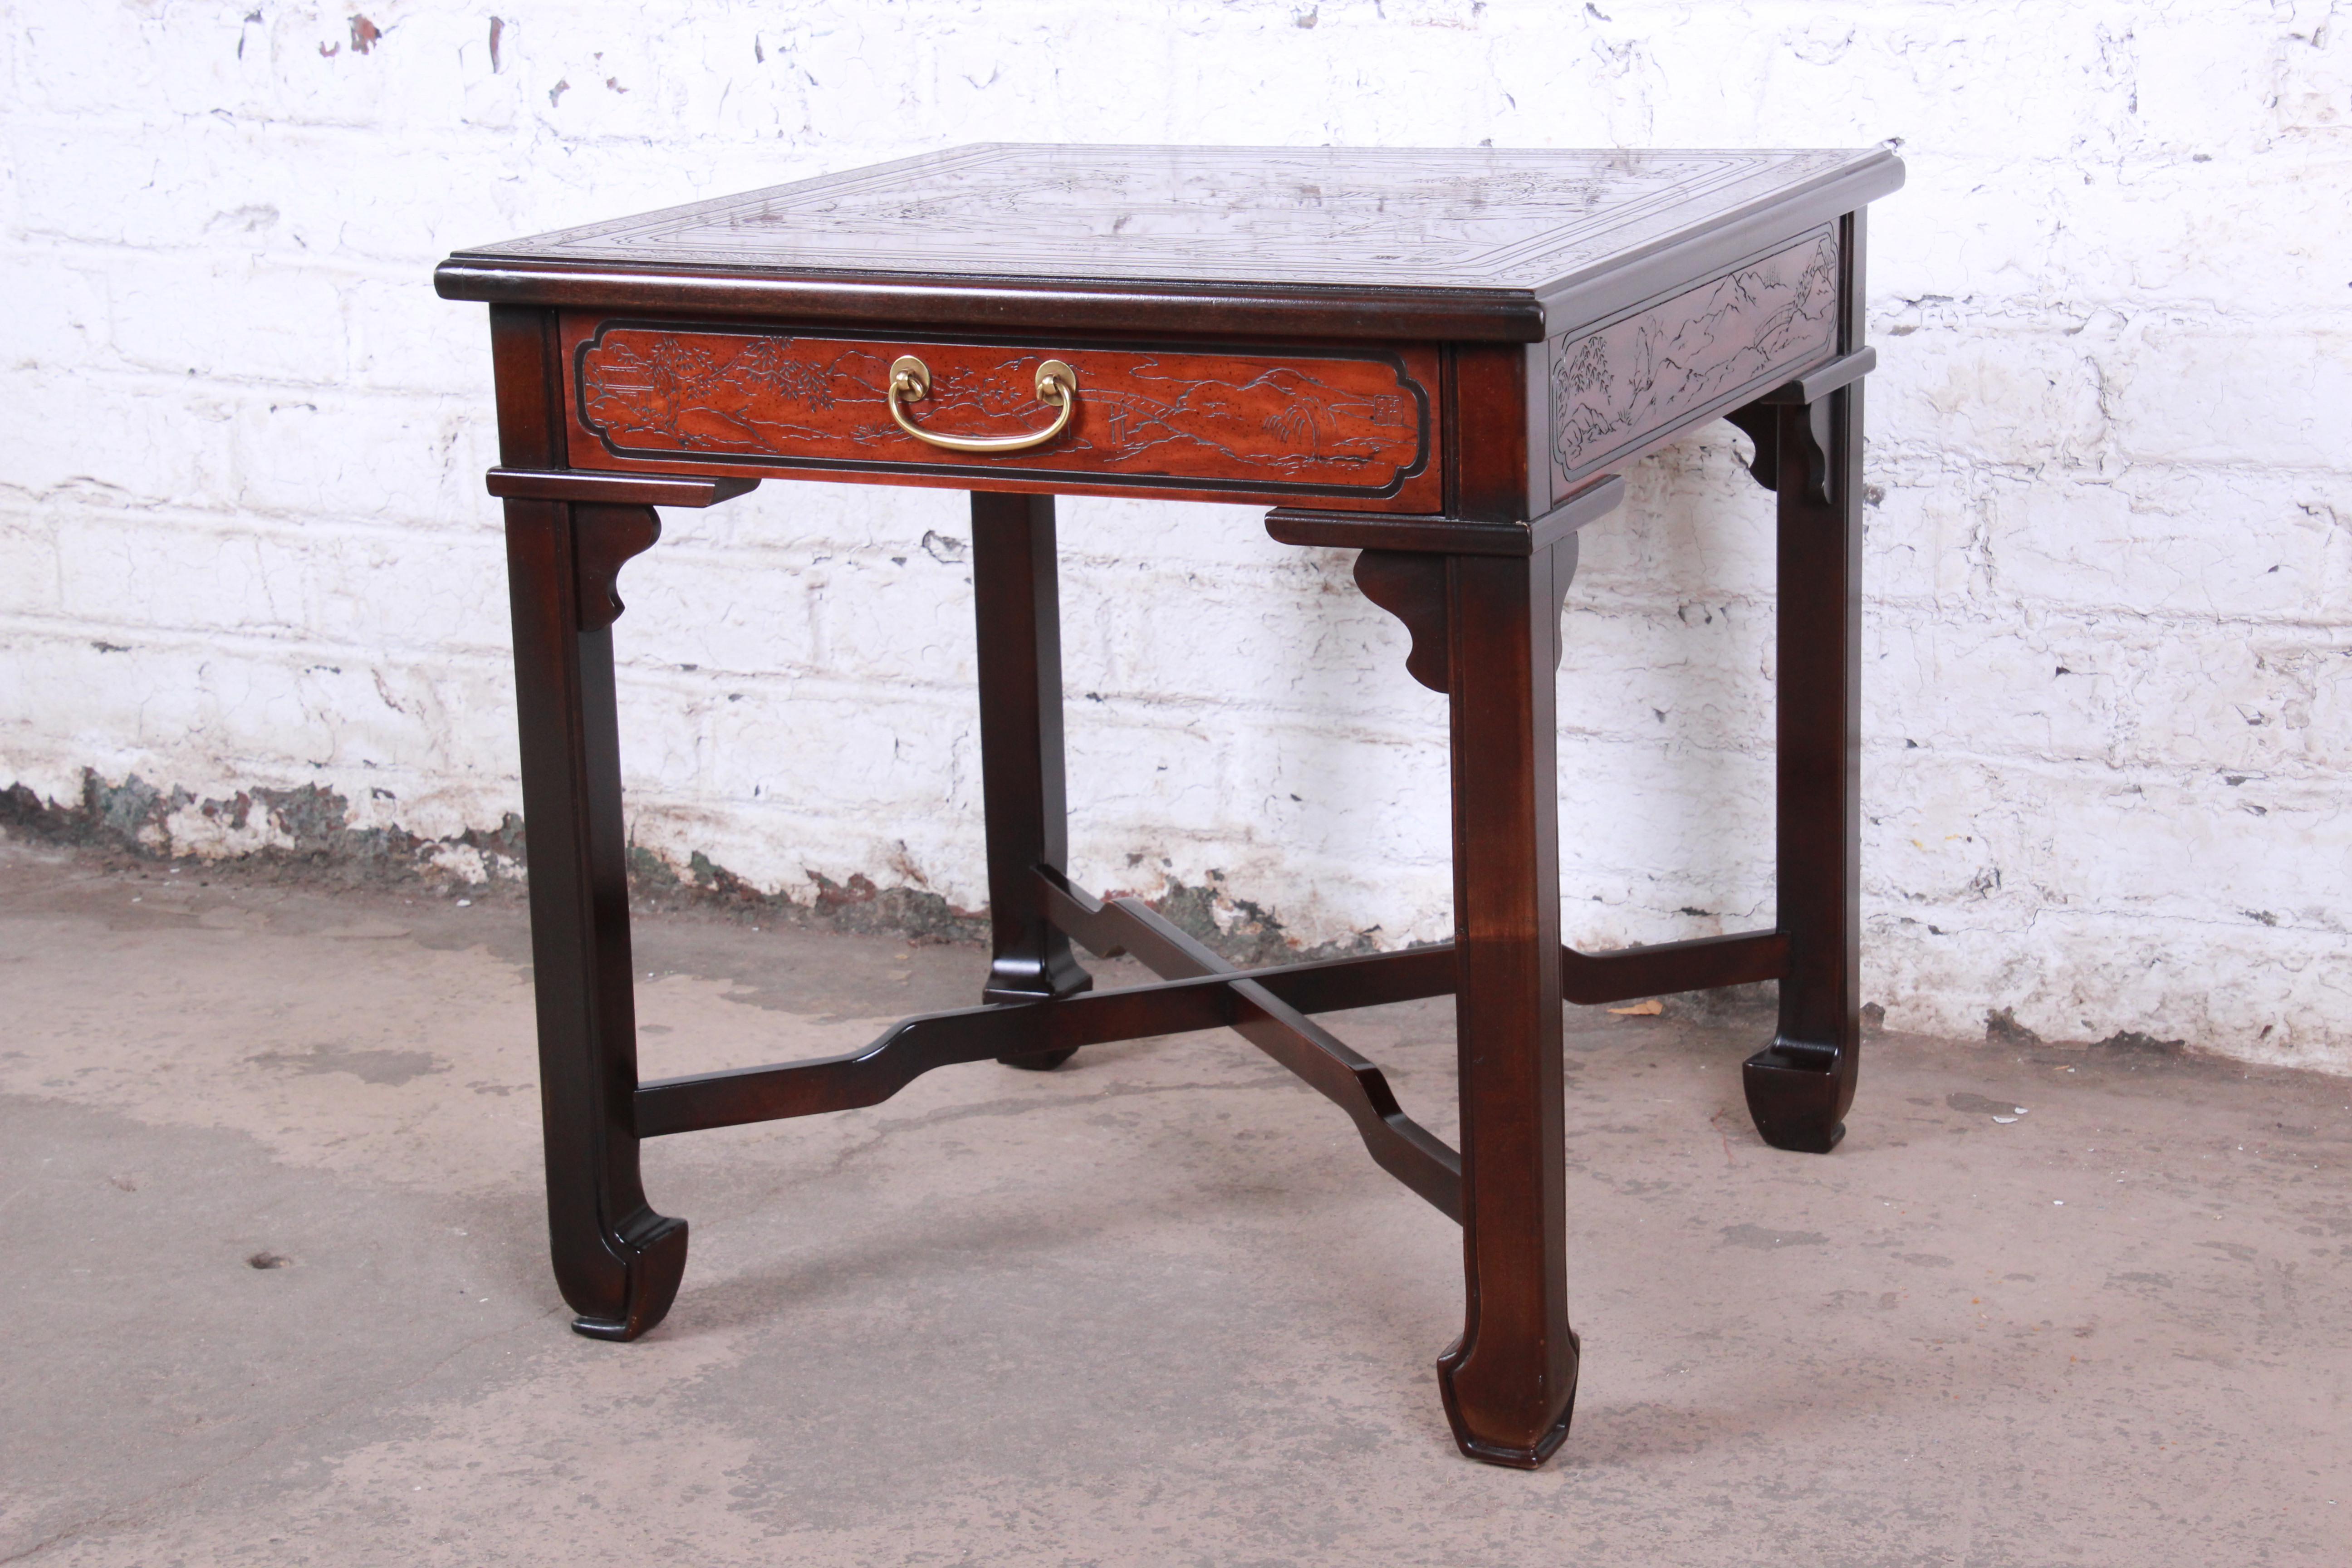 A gorgeous Hollywood Regency Chinoiserie x-base side table from the Connoisseur line by Drexel Heritage. The table features beautiful mahogany wood grain and nice carved Asian details with nature scenes. It has a single drawer with the original